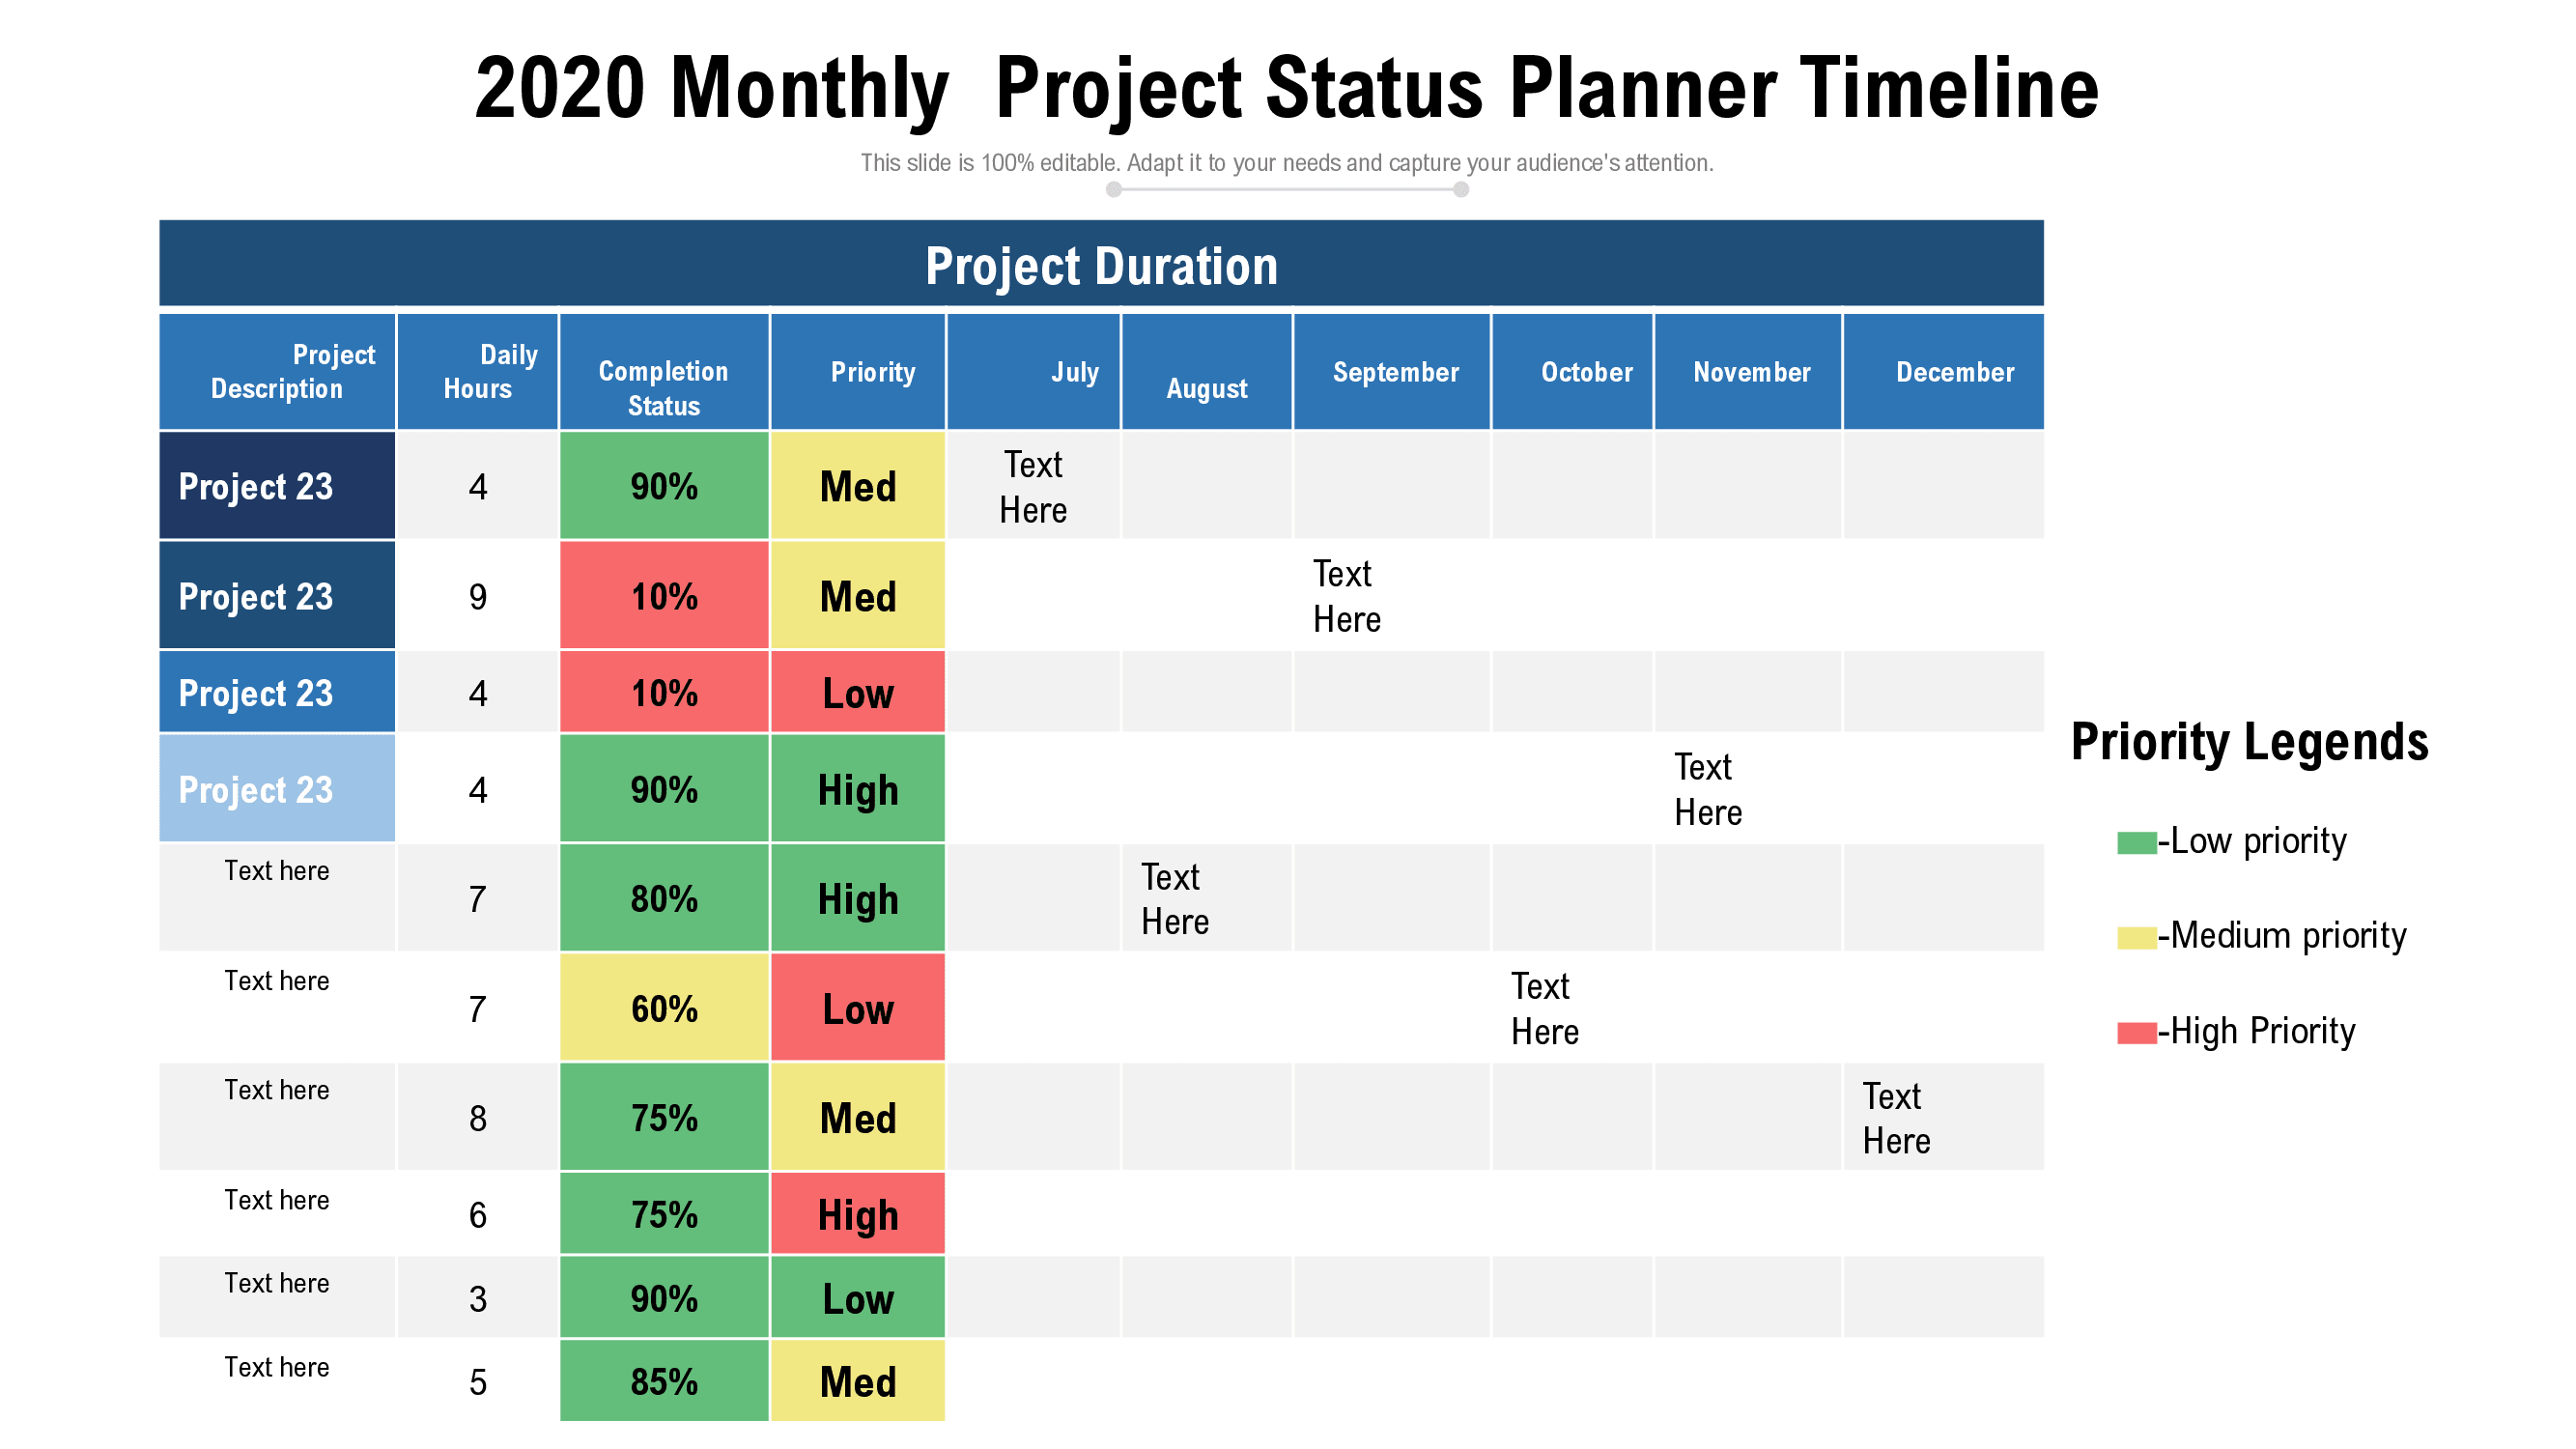 2020 Monthly Project Status Planner Timeline